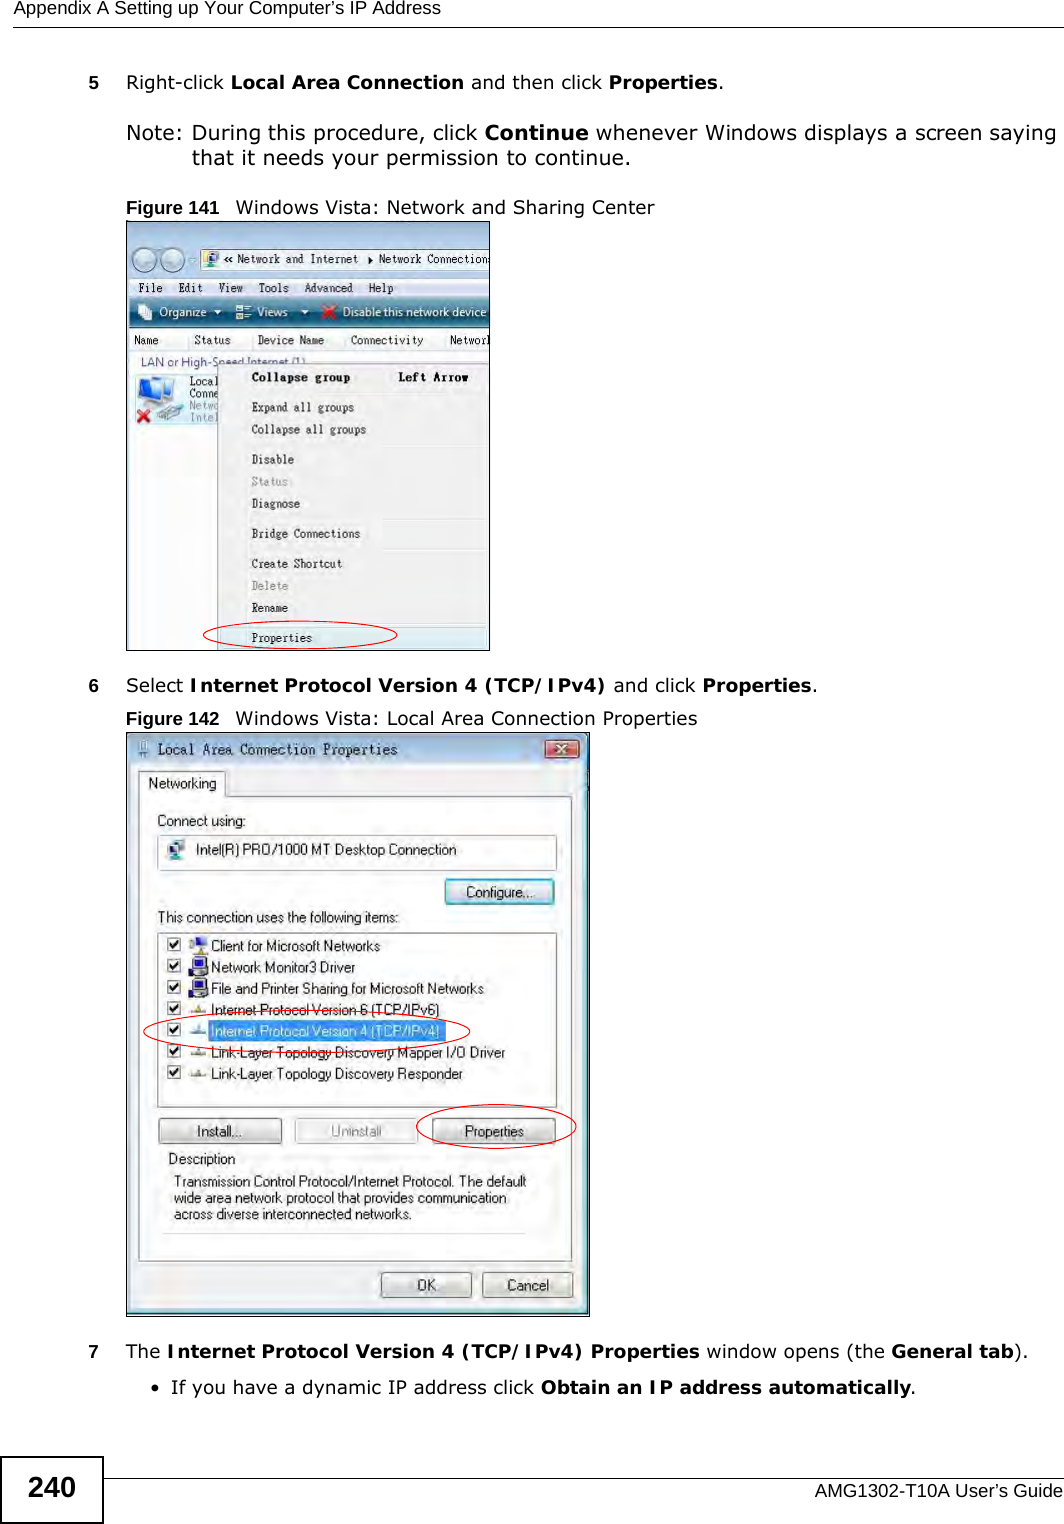 Appendix A Setting up Your Computer’s IP AddressAMG1302-T10A User’s Guide2405Right-click Local Area Connection and then click Properties.Note: During this procedure, click Continue whenever Windows displays a screen saying that it needs your permission to continue.Figure 141   Windows Vista: Network and Sharing Center6Select Internet Protocol Version 4 (TCP/IPv4) and click Properties.Figure 142   Windows Vista: Local Area Connection Properties7The Internet Protocol Version 4 (TCP/IPv4) Properties window opens (the General tab).• If you have a dynamic IP address click Obtain an IP address automatically.